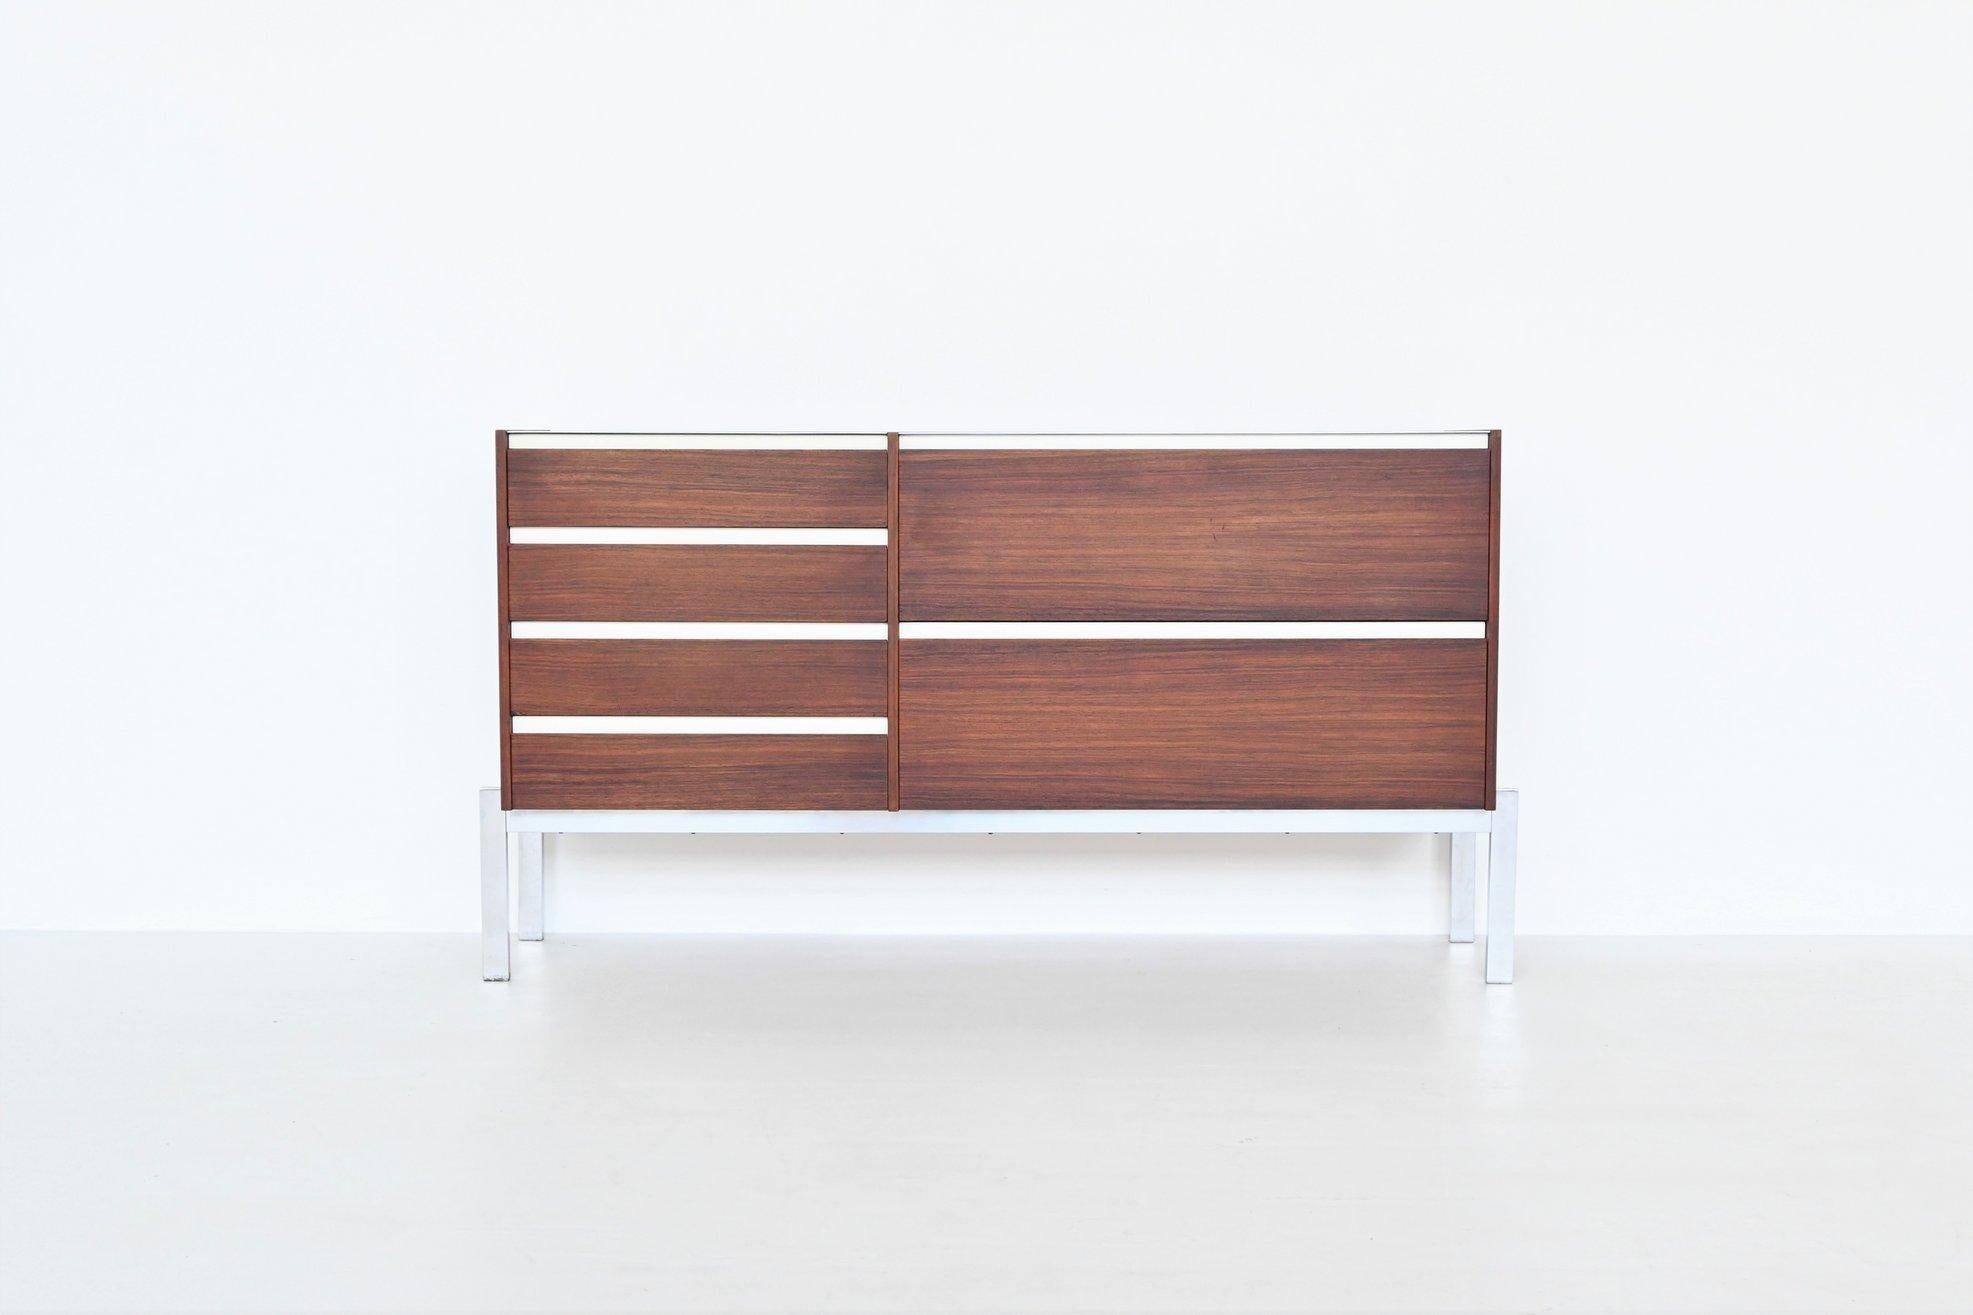 Beautiful shaped modernist sideboard designed by Kho Liang Ie and Wim Crouwel and manufactured by Fristho Franeker, The Netherlands 1957. This fantastic sideboard is executed in nicely grained rosewood supported by a chrome plated metal frame. Very